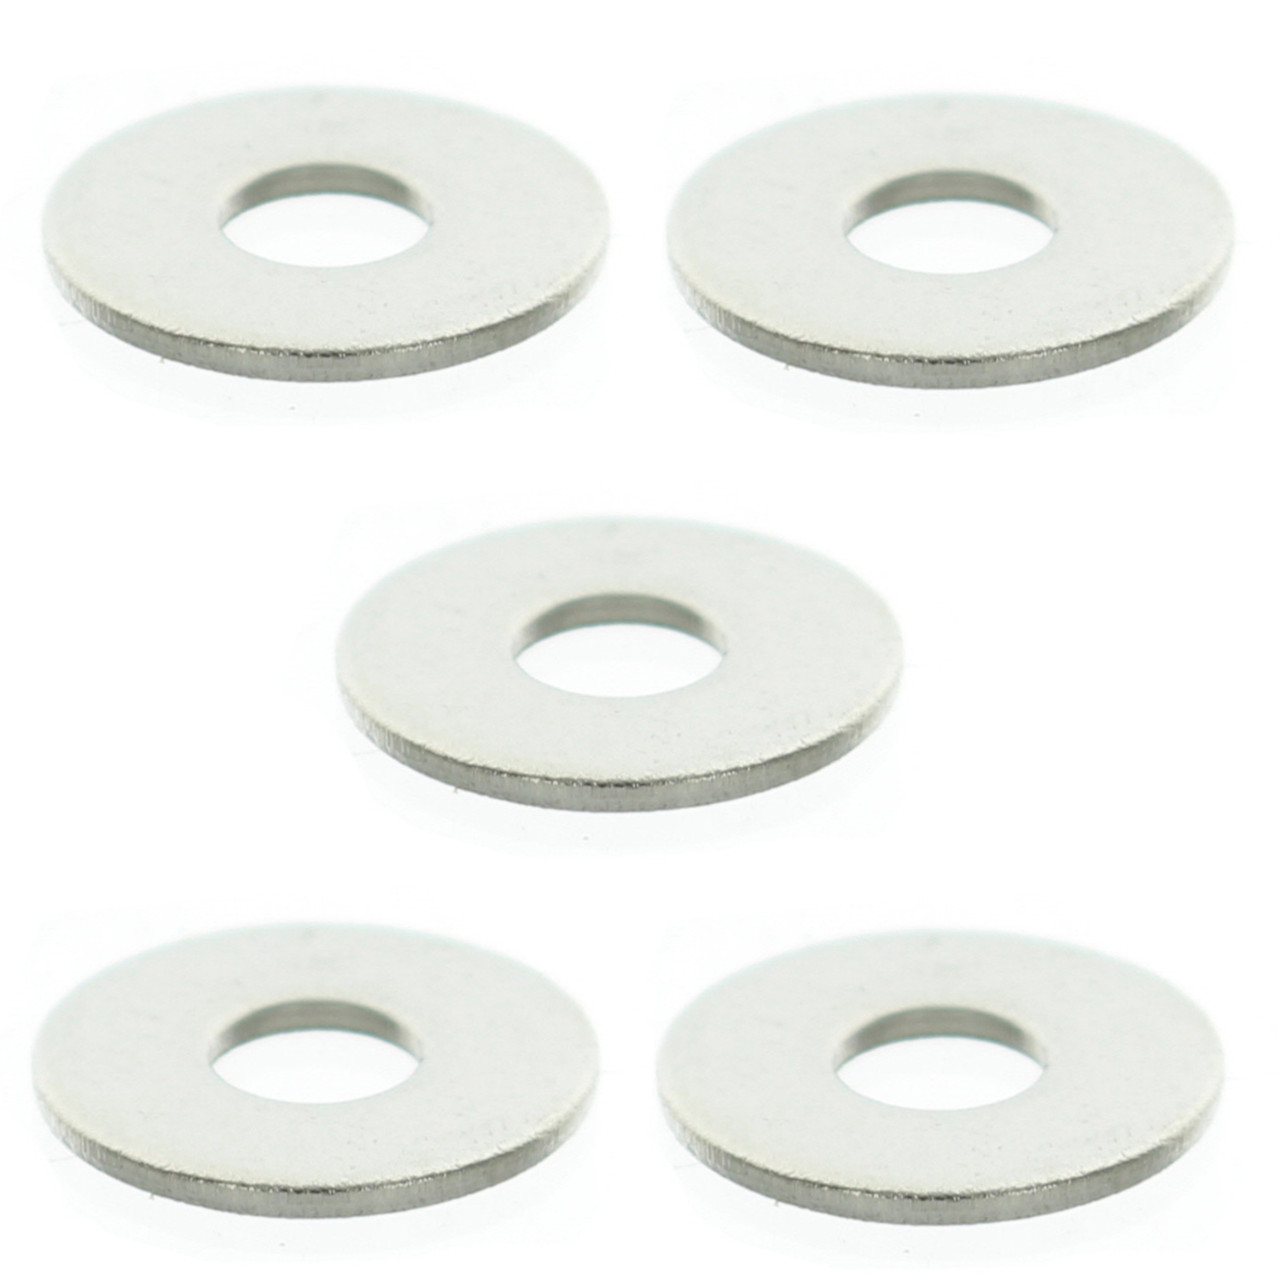 Sea-Doo New OEM, Stainless Steel 5mm Flat Washer, Pack of 5, 234052600